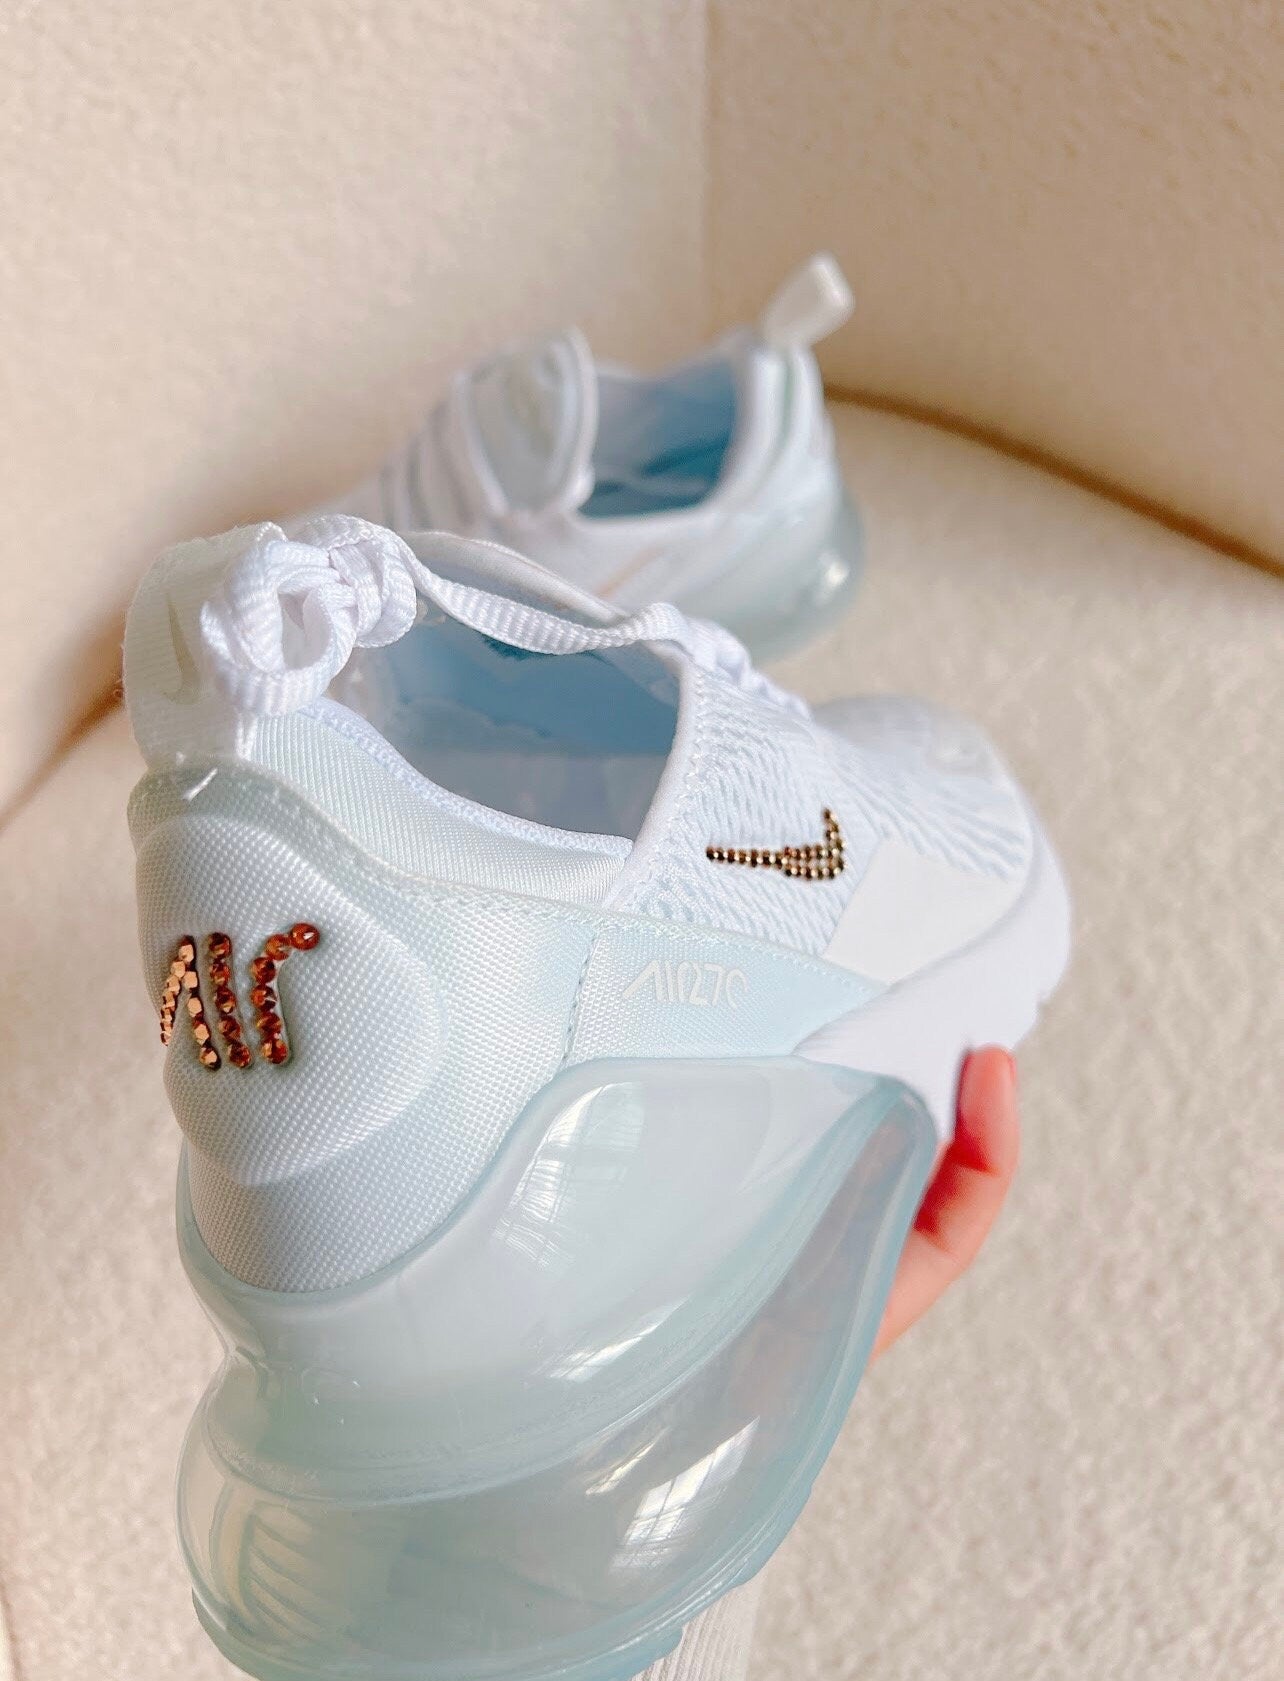 Wedding Shoes Nike Air Max 270 Custom Sneaker With Crystals